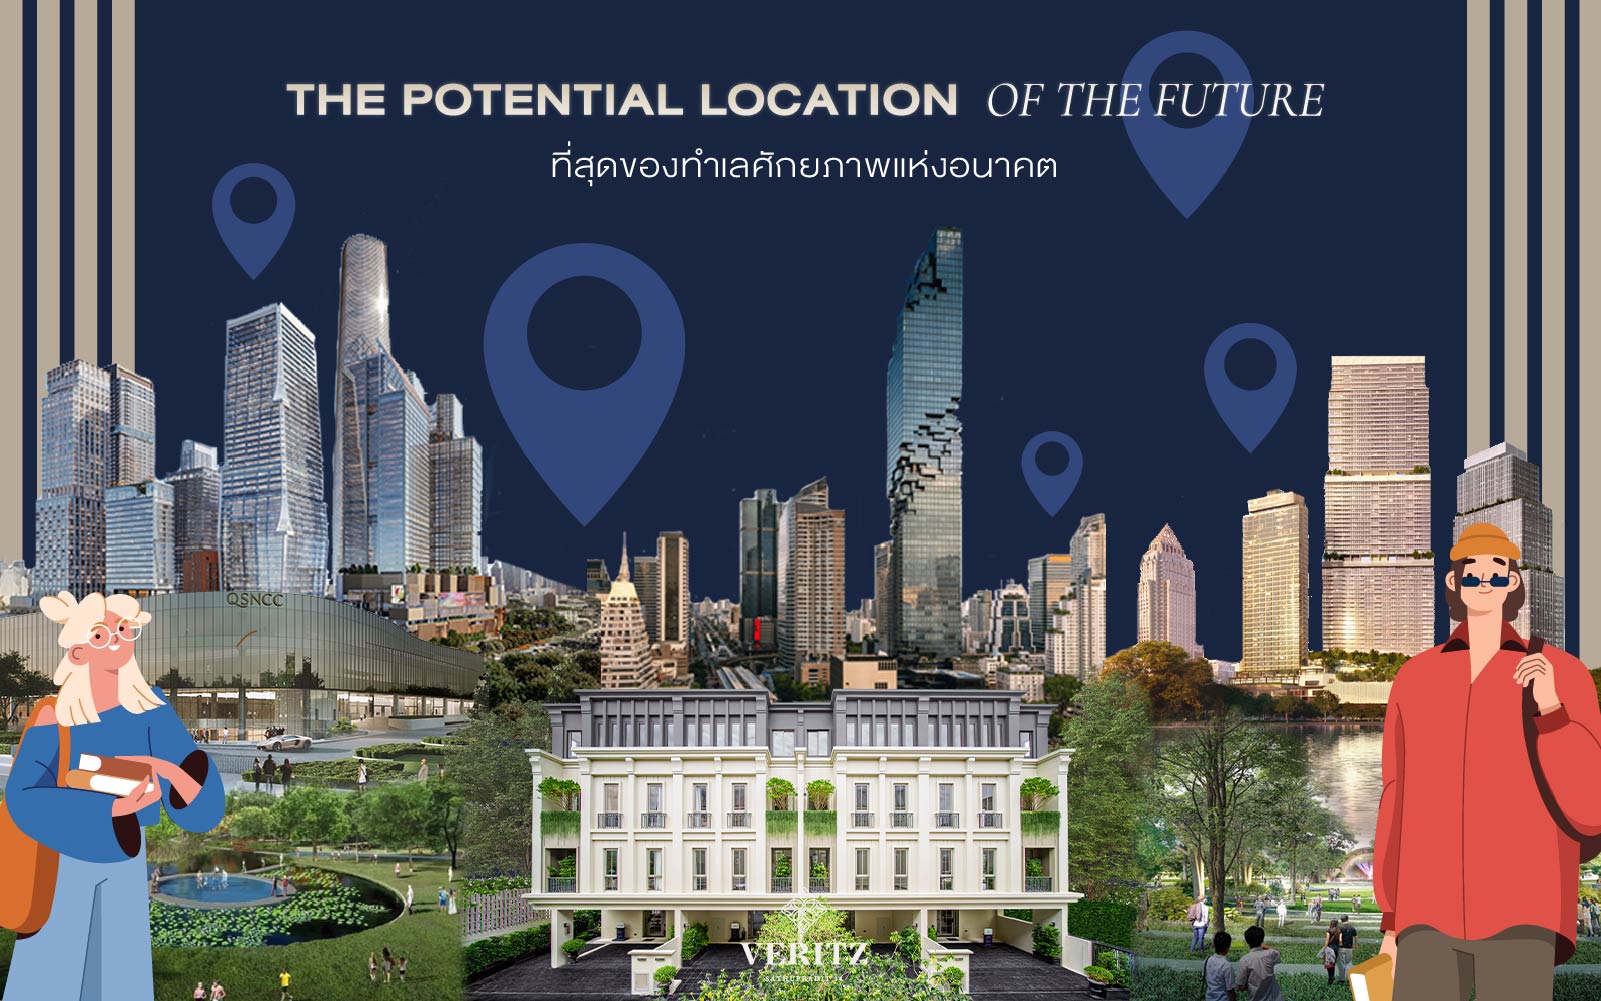 The Potential Location of the future… ทำเลศักยภาพแห่งอนาคต